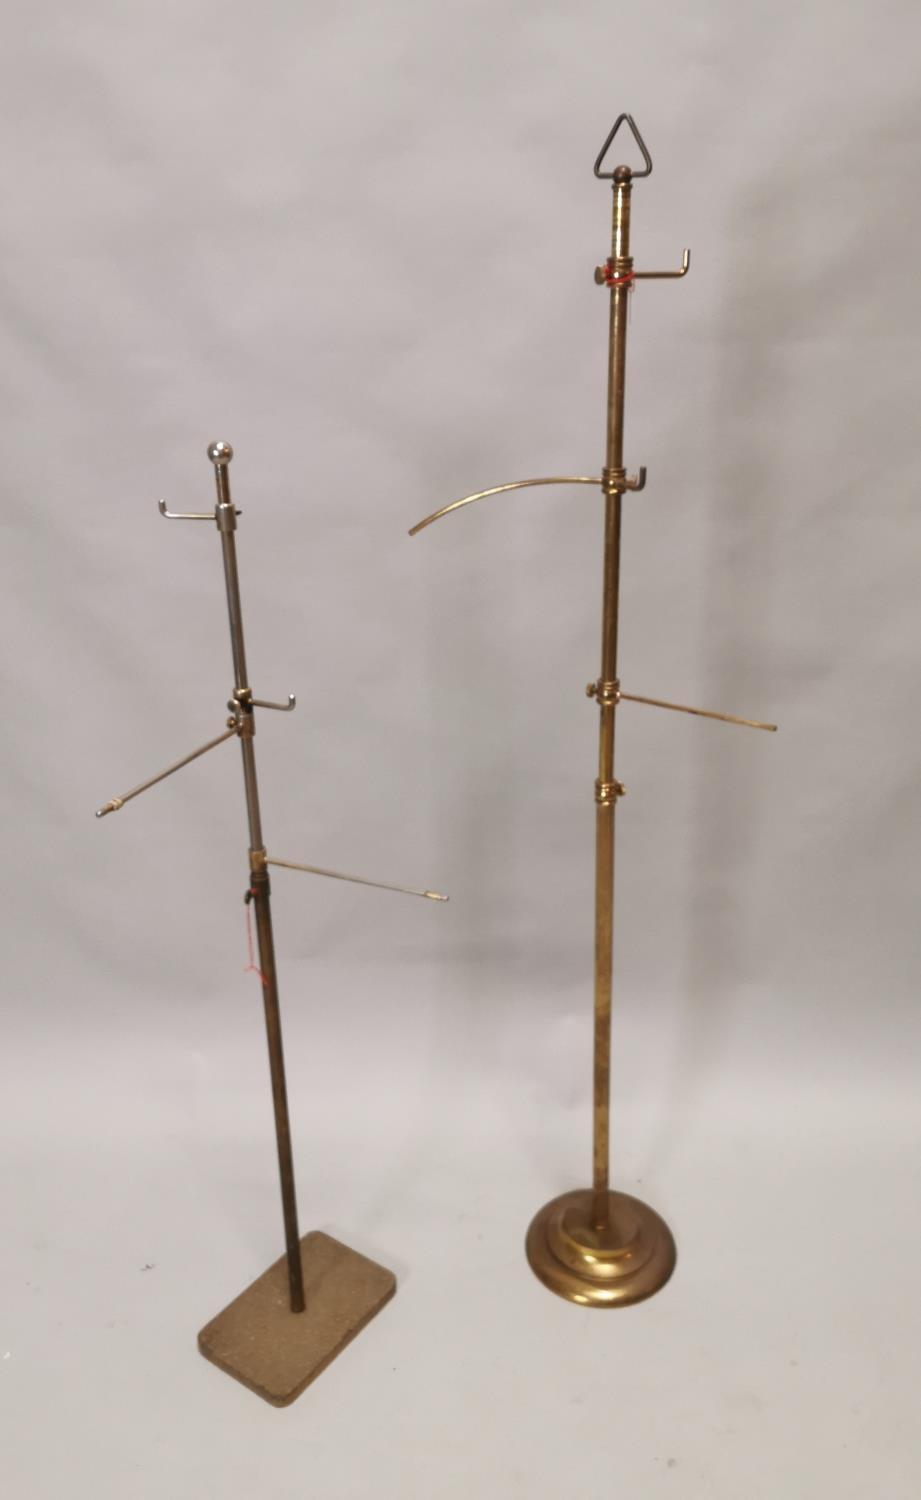 Two early 20th C. brass haberdashery shop hat stands